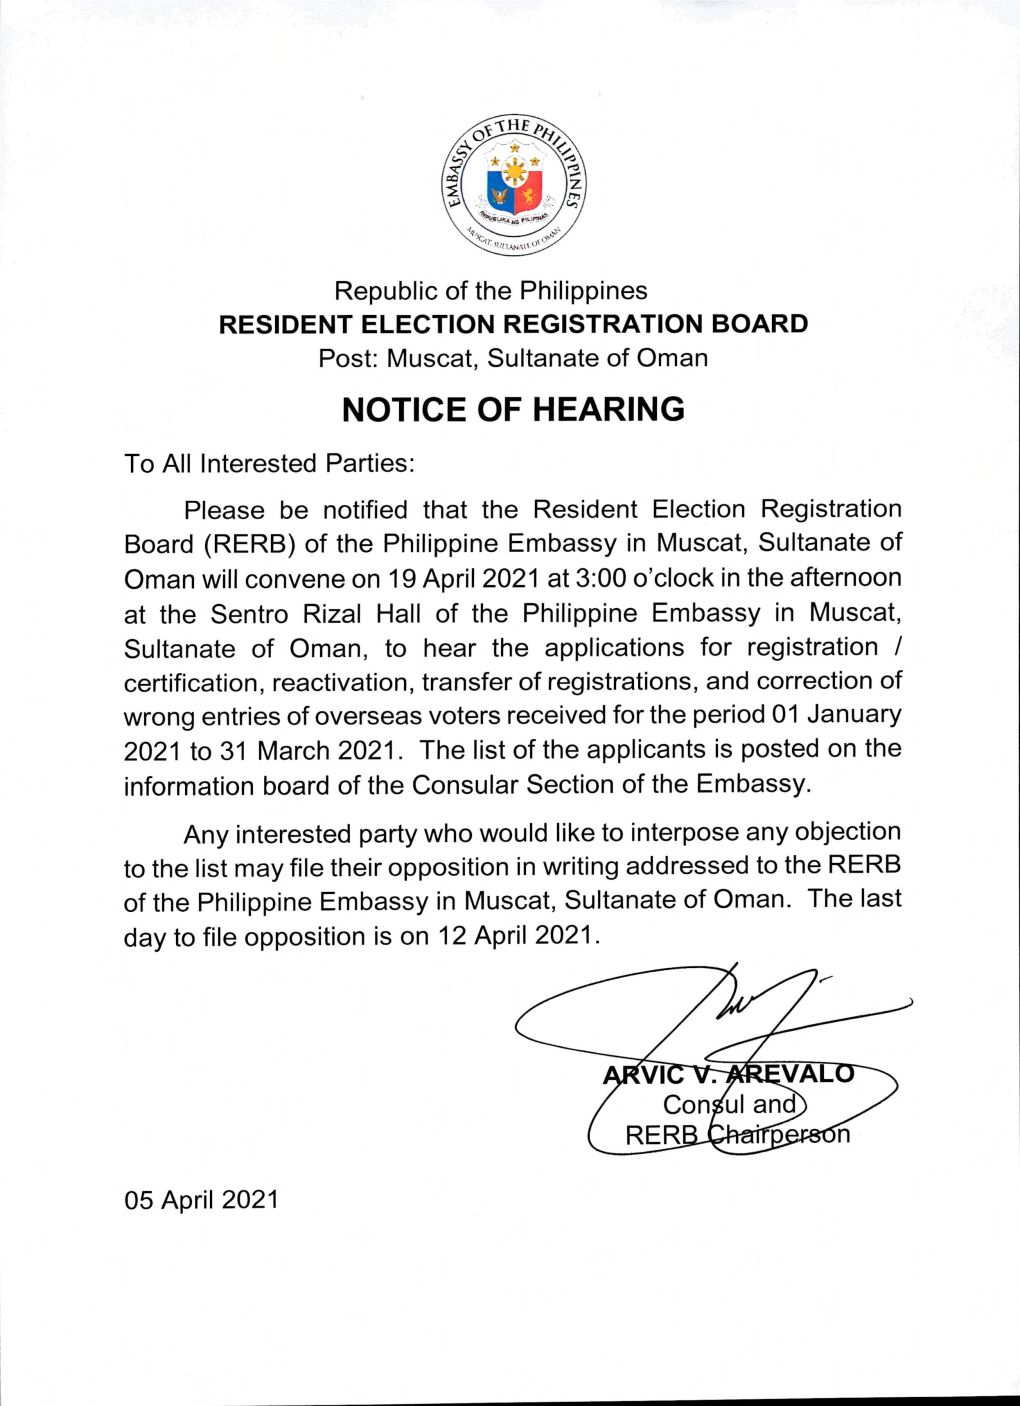 RERB Hearing for 19 April 20